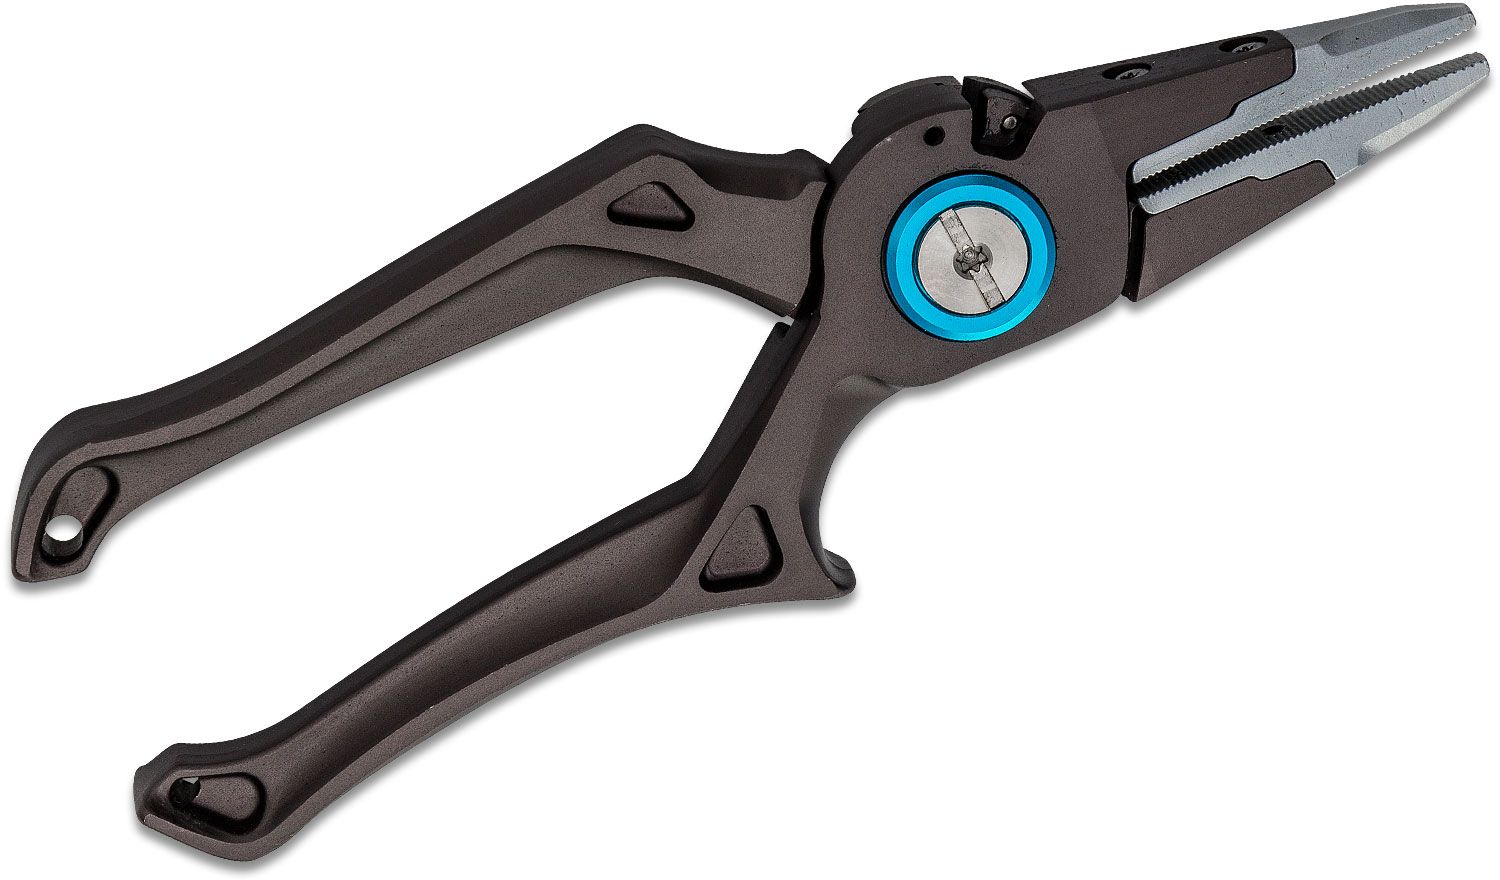 Upgrade Your Fishing Gear with the Gerber Magniplier